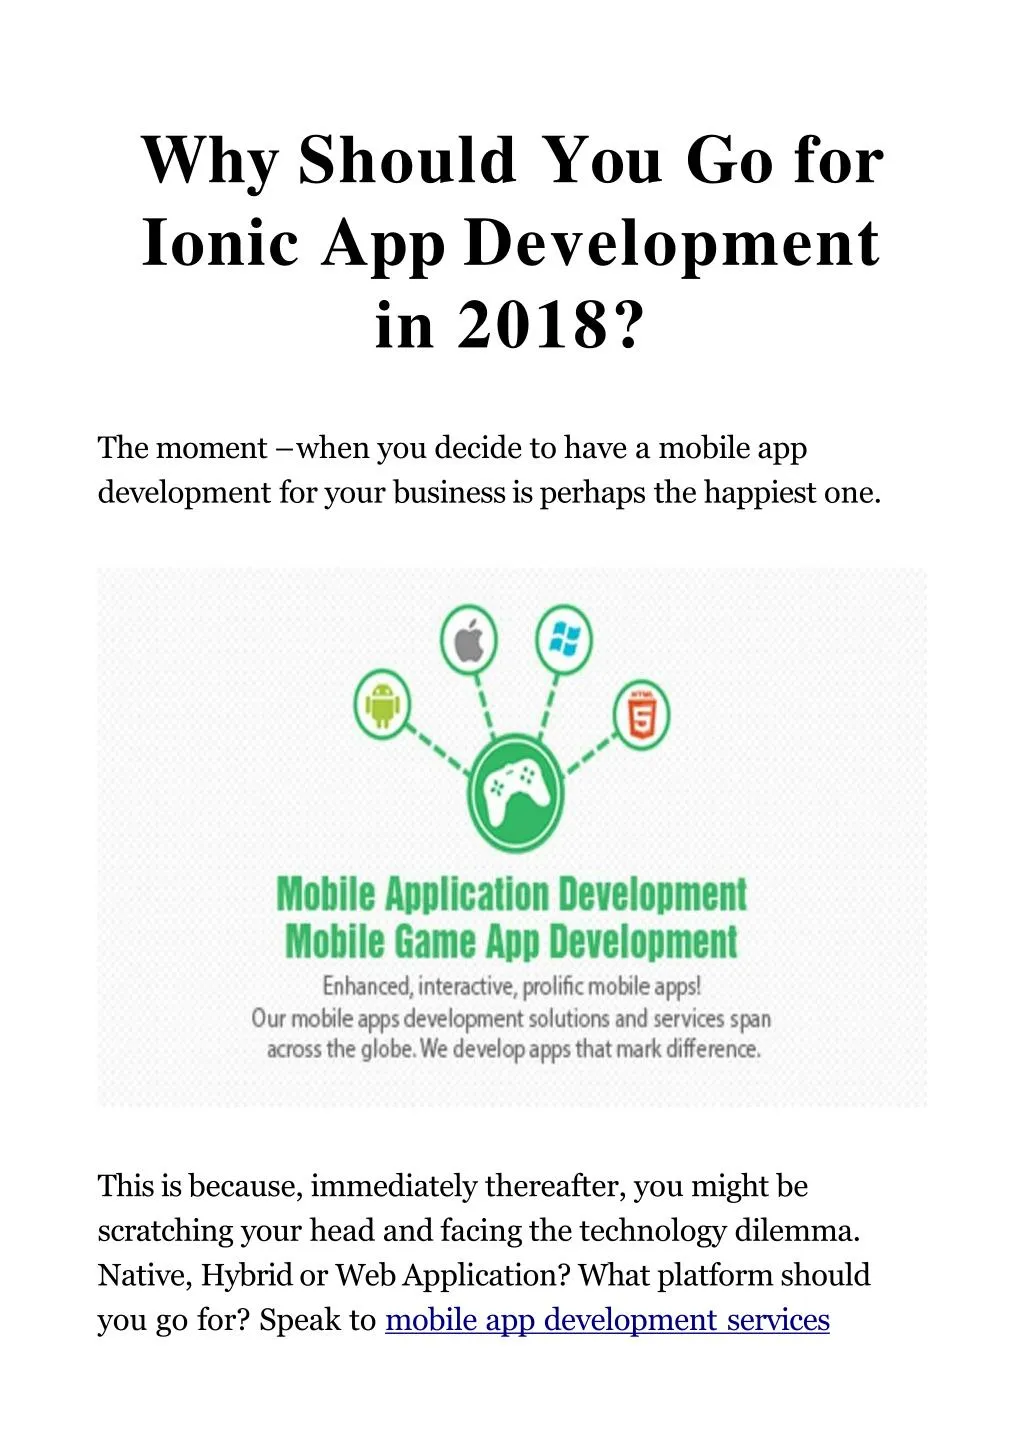 why should you go for ionic app development in 2018